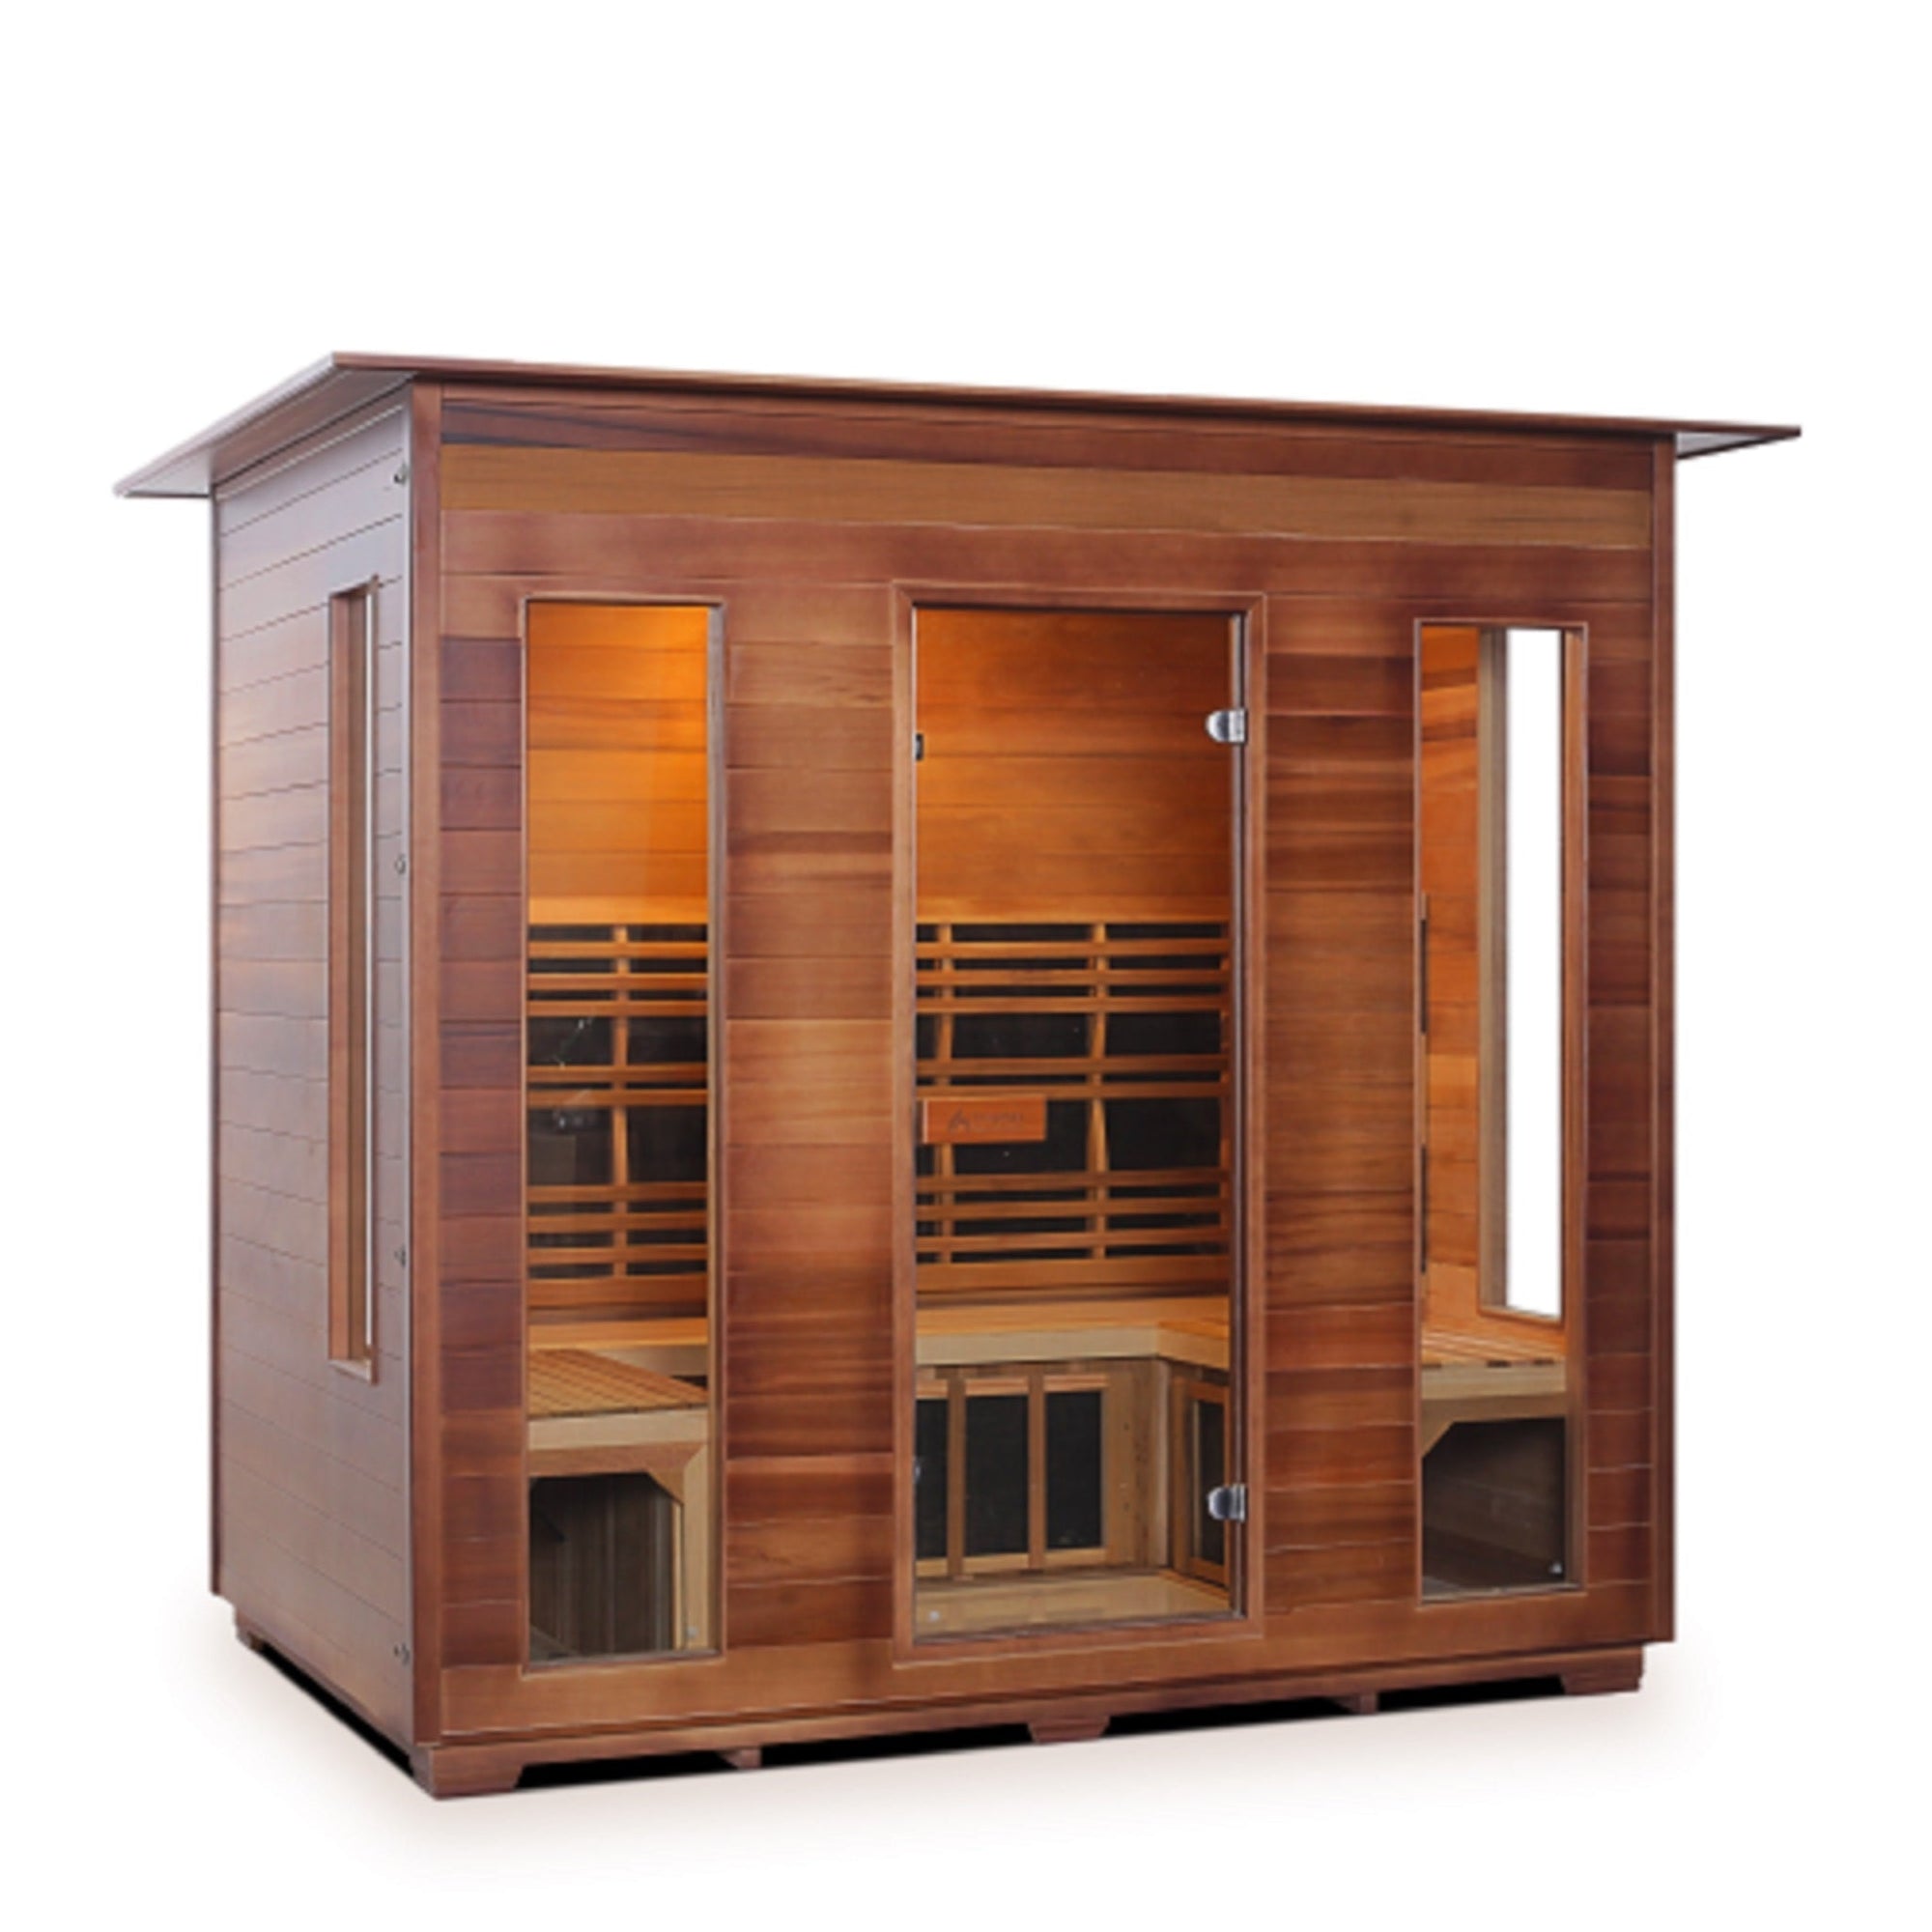 Enlighten Sauna Infrared/Traditional DIAMOND Canadian Red Cedar Wood Outside And Inside indoor Roofed five person sauna with glass door and windows isometric view - Vital Hydrotherapy